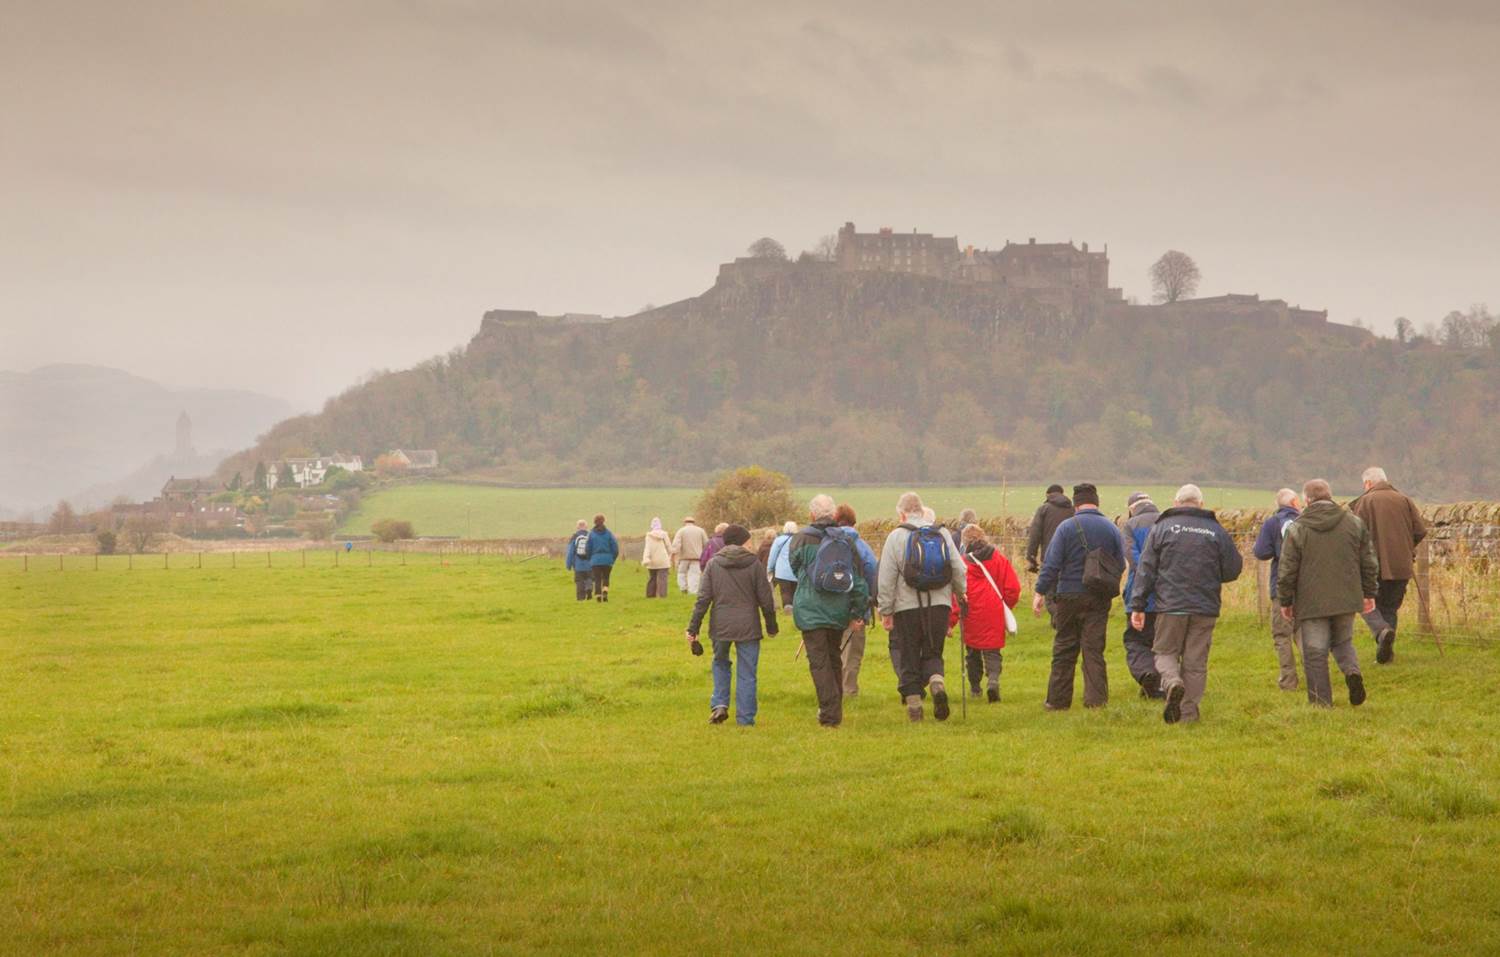 A group of walkers on a field with a hill and castle in the distance